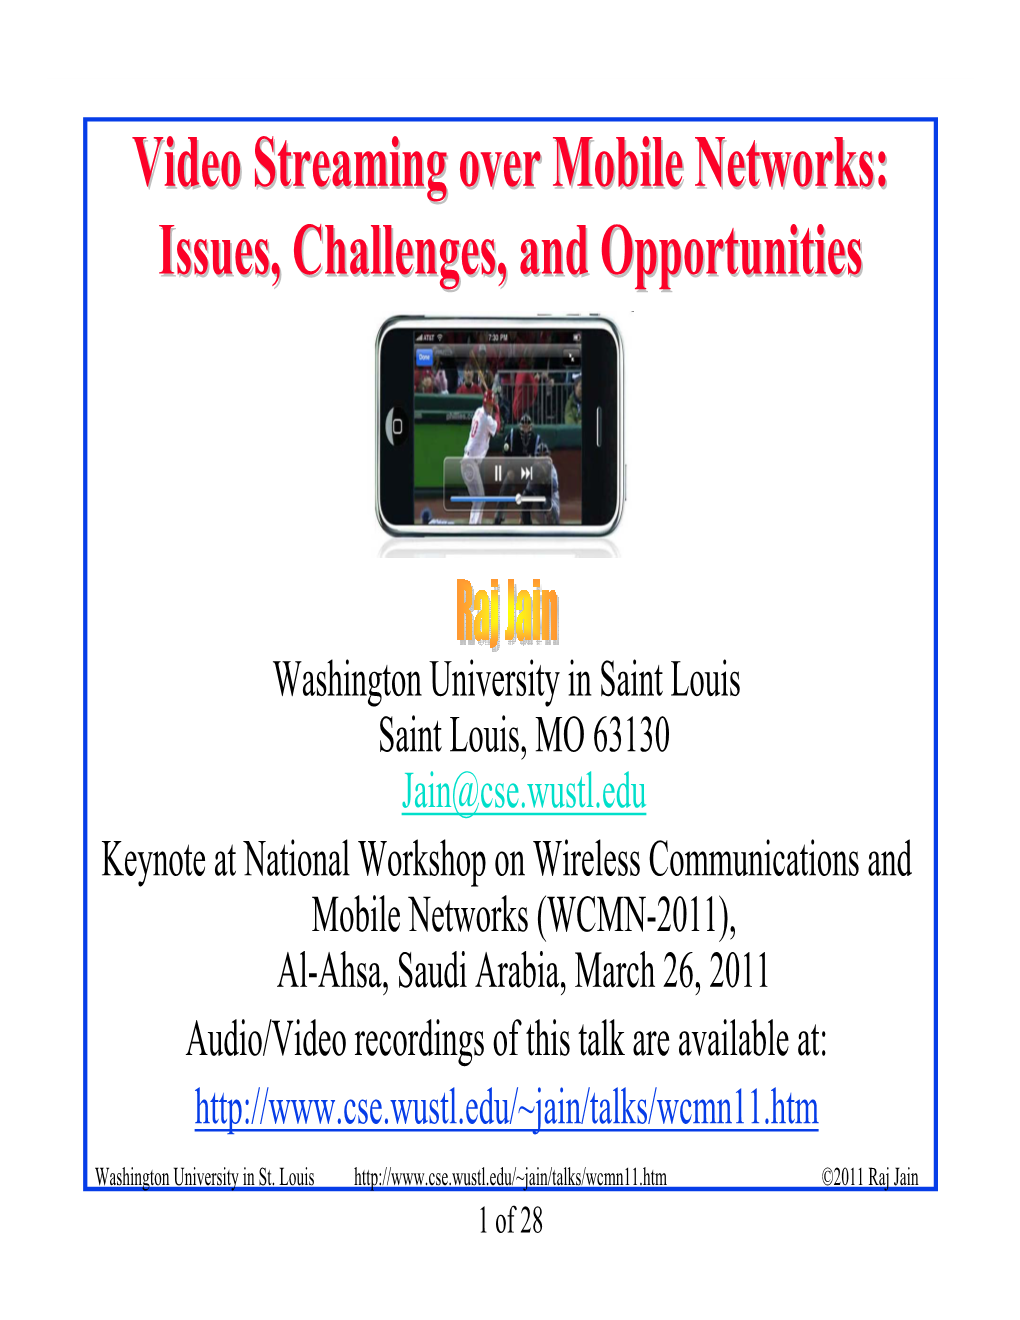 Video Streaming Over Mobile Networks: Issues, Challenges, And